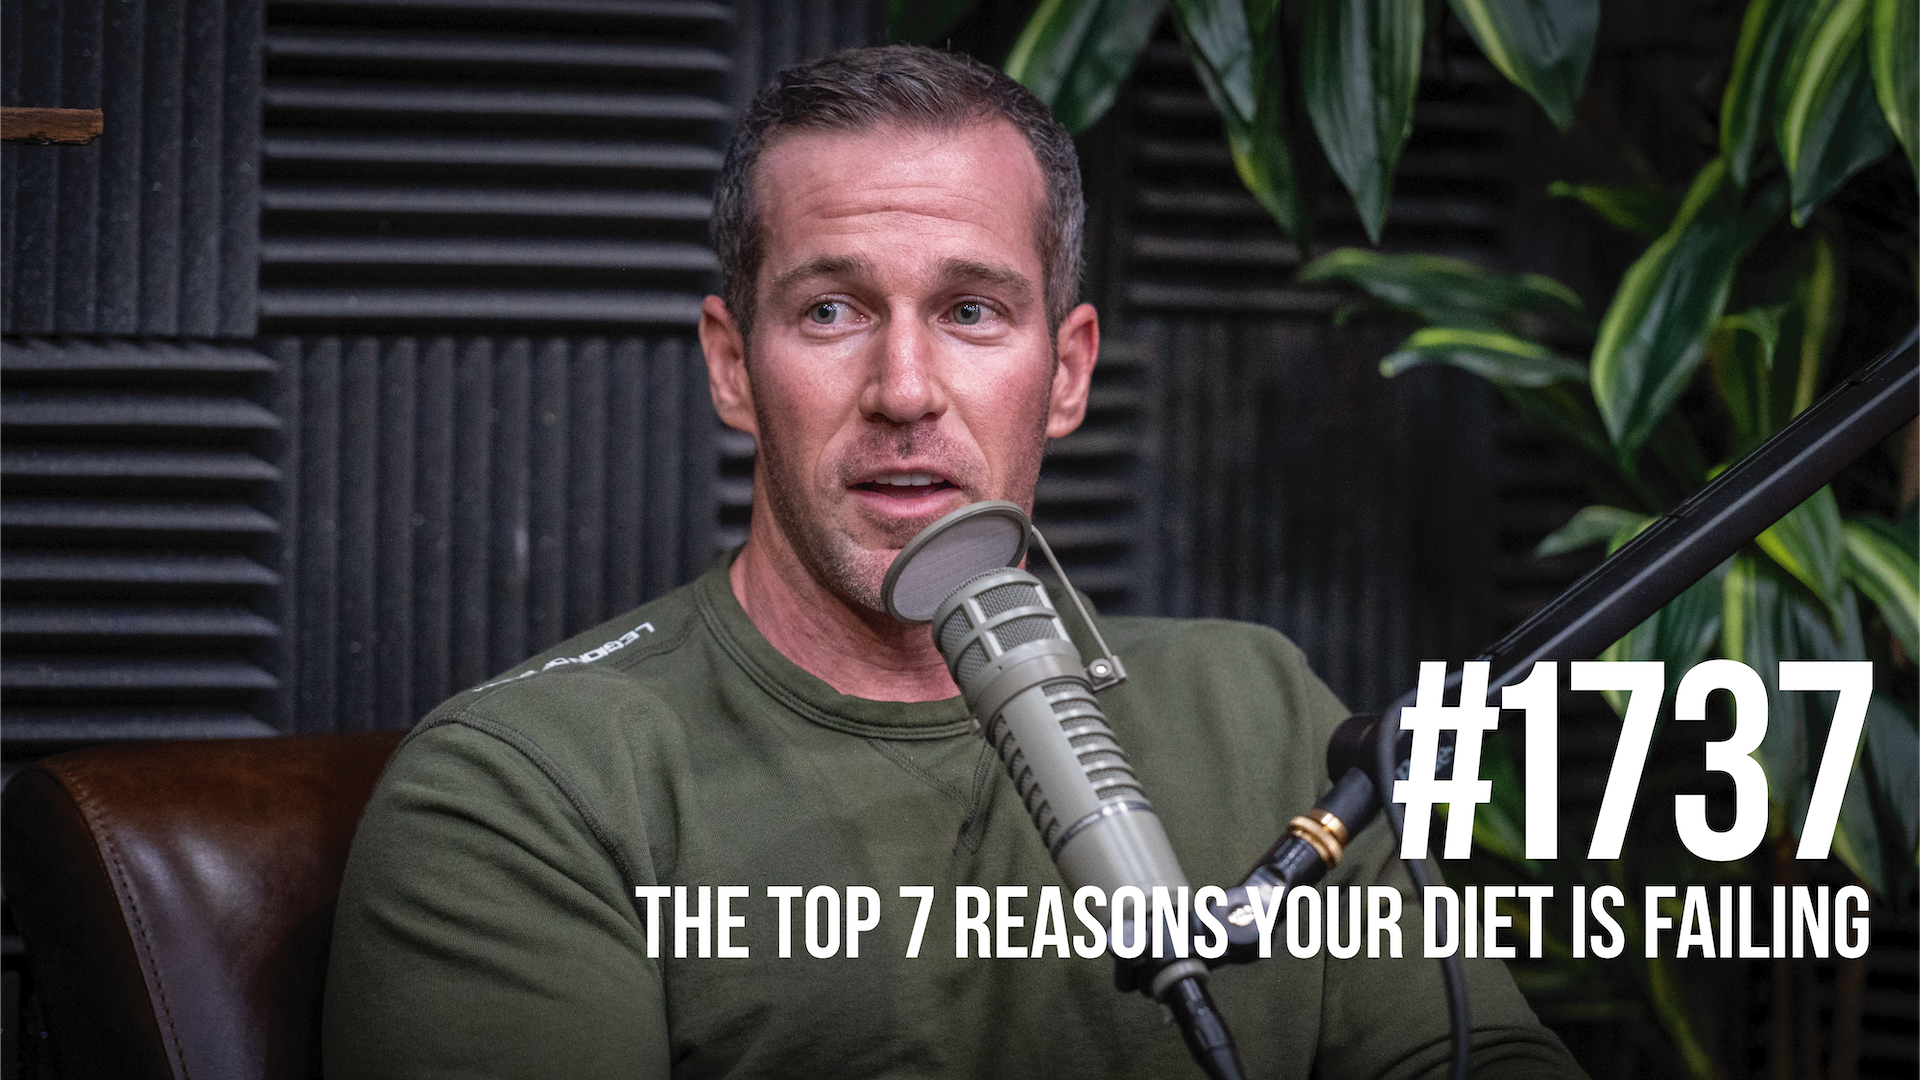 1737: The Top 7 Reasons Your Diet Is Failing With Jason Phillips